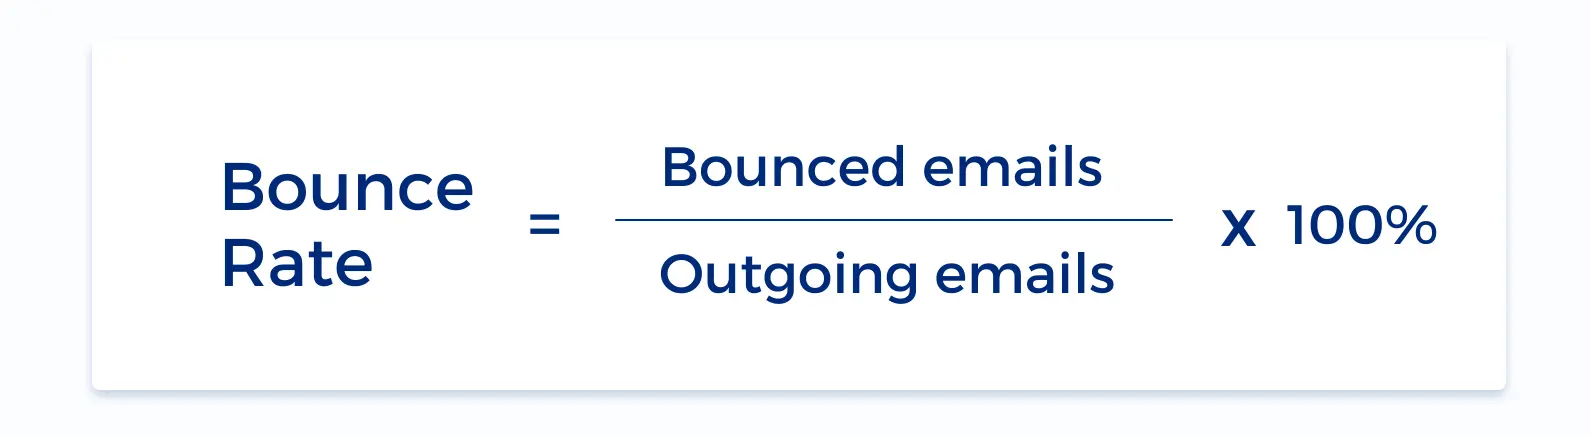 bounce rate email